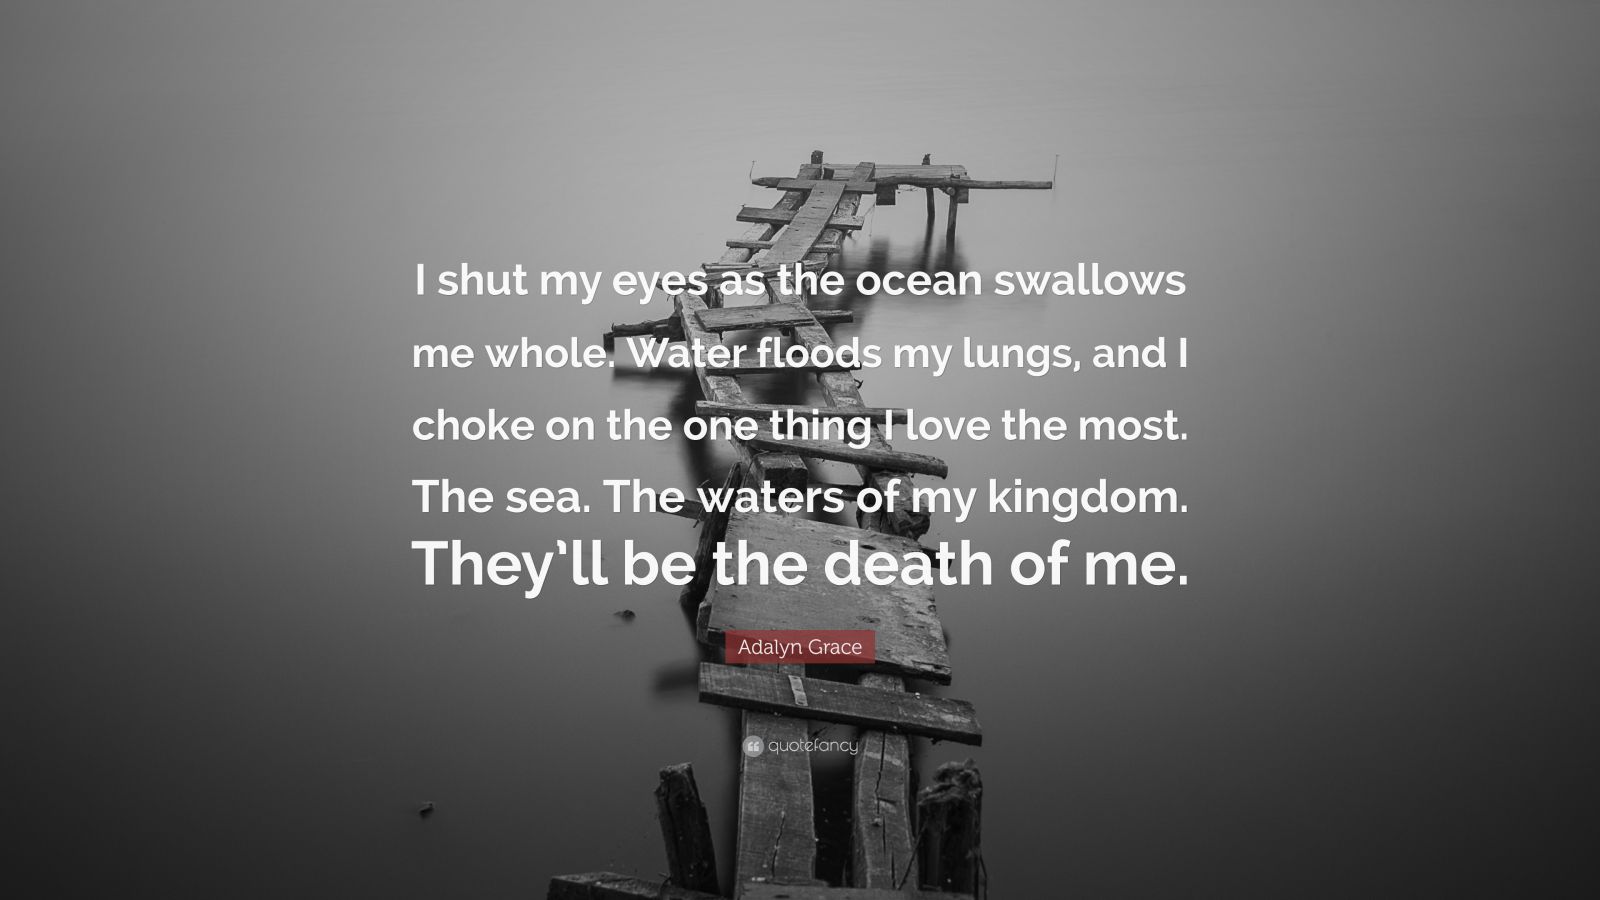 Adalyn Grace Quote: “I shut my eyes as the ocean swallows me whole